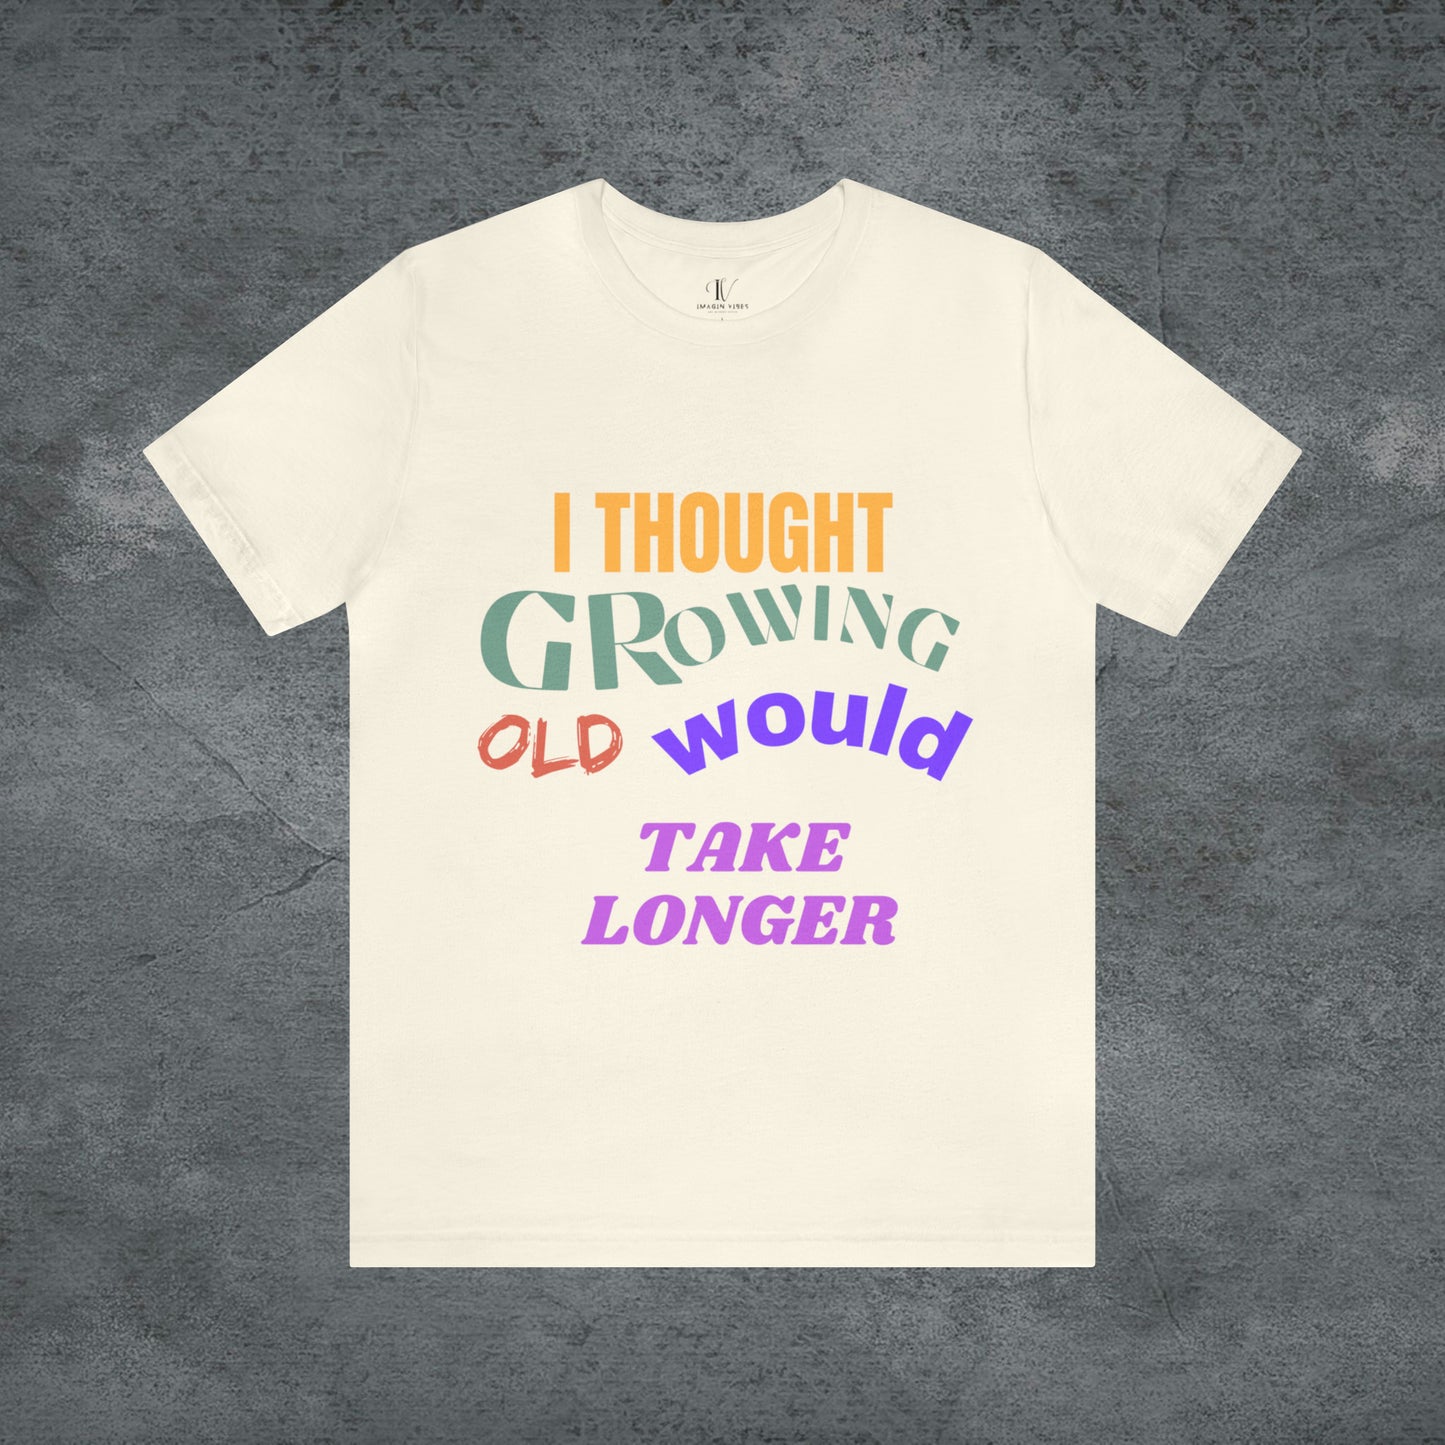 I Thought Growing Old Would Take Longer T-Shirt - Getting Older T-Shirt - Funny Adulting Tee - Old Age T-Shirt - Old Person T-Shirt T-Shirt Natural S 